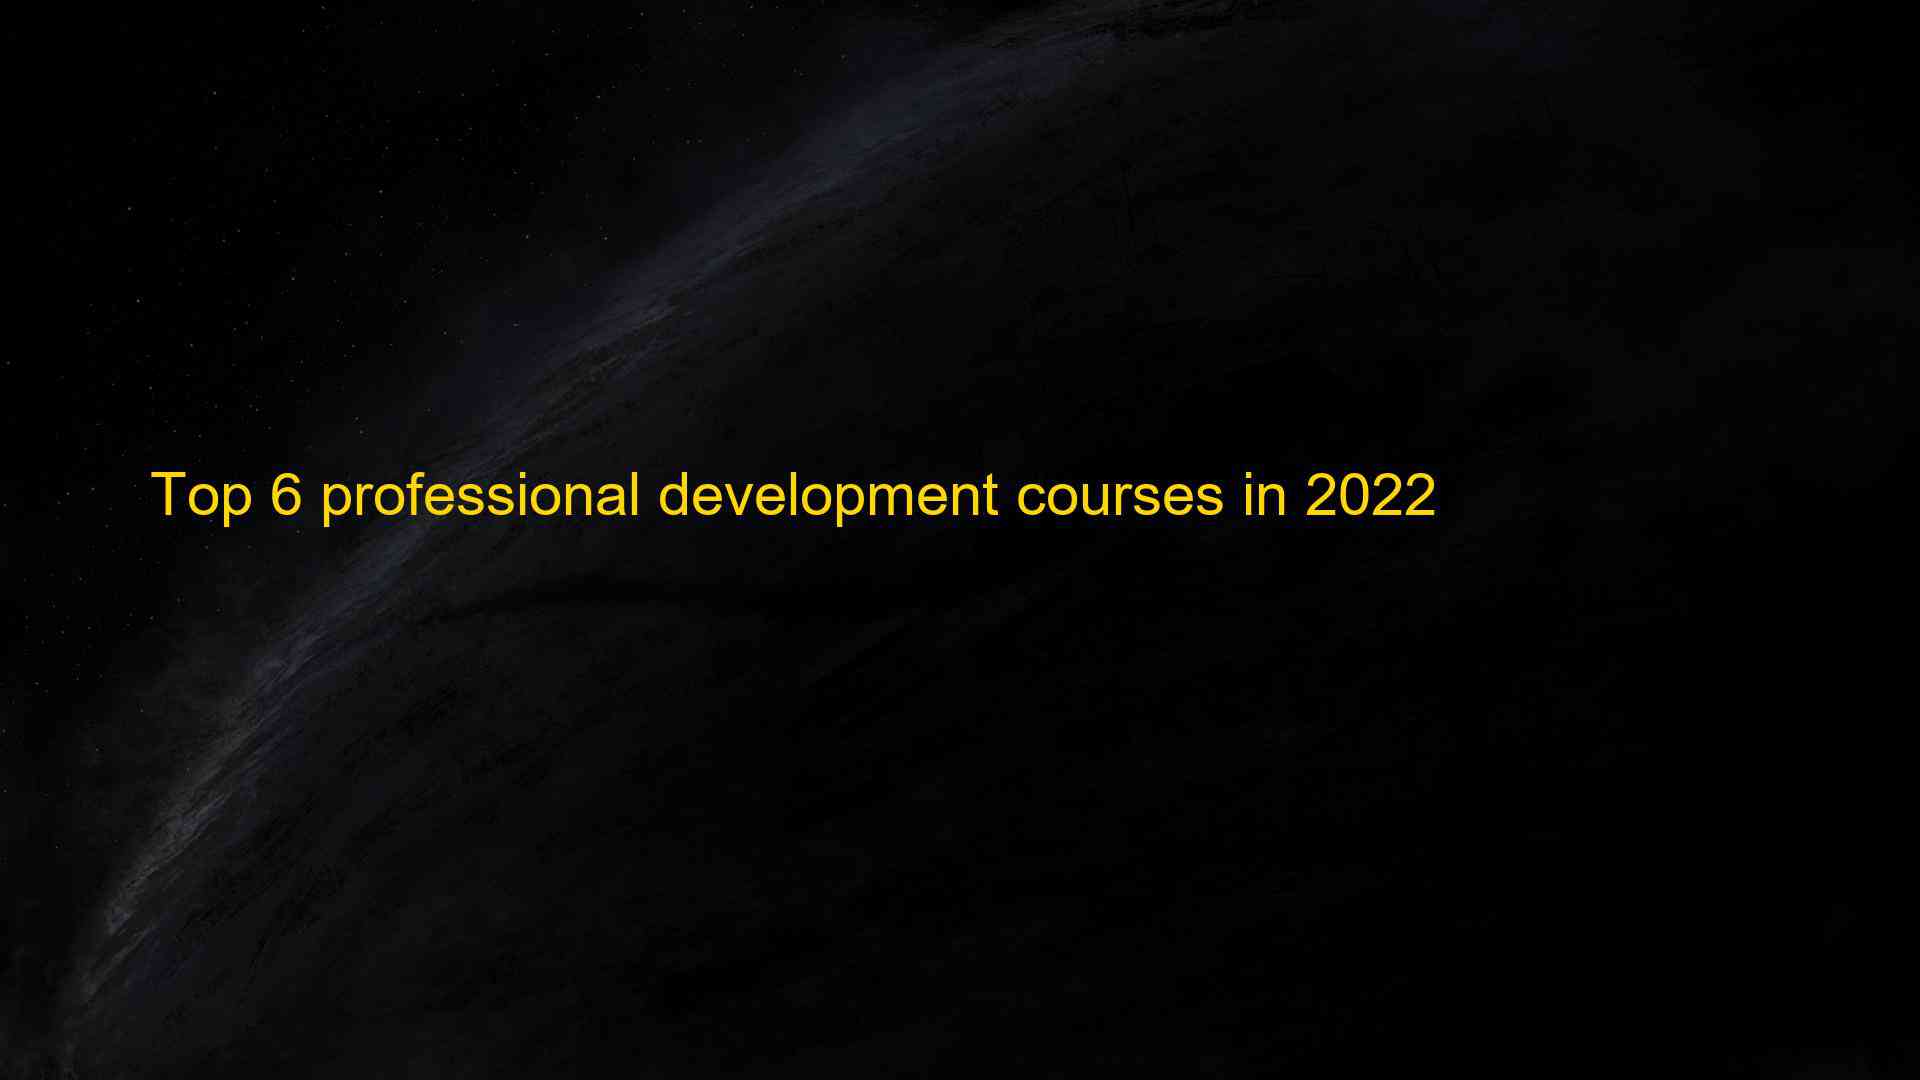 Top 6 professional development courses in 2022 1660819923